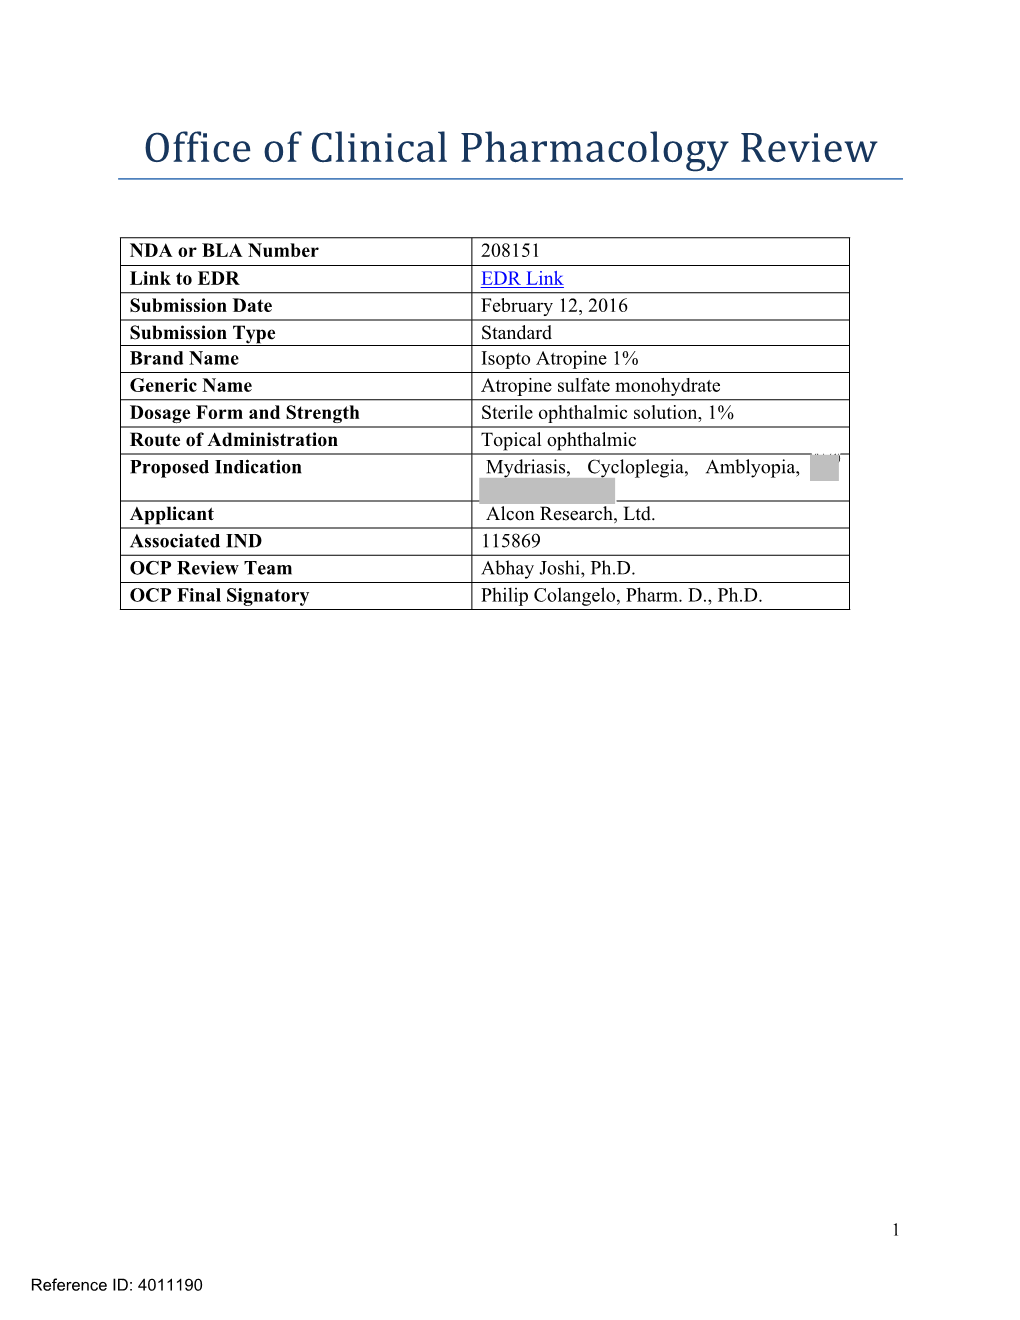 Office of Clinical Pharmacology Review: Isopto Atropine 1%